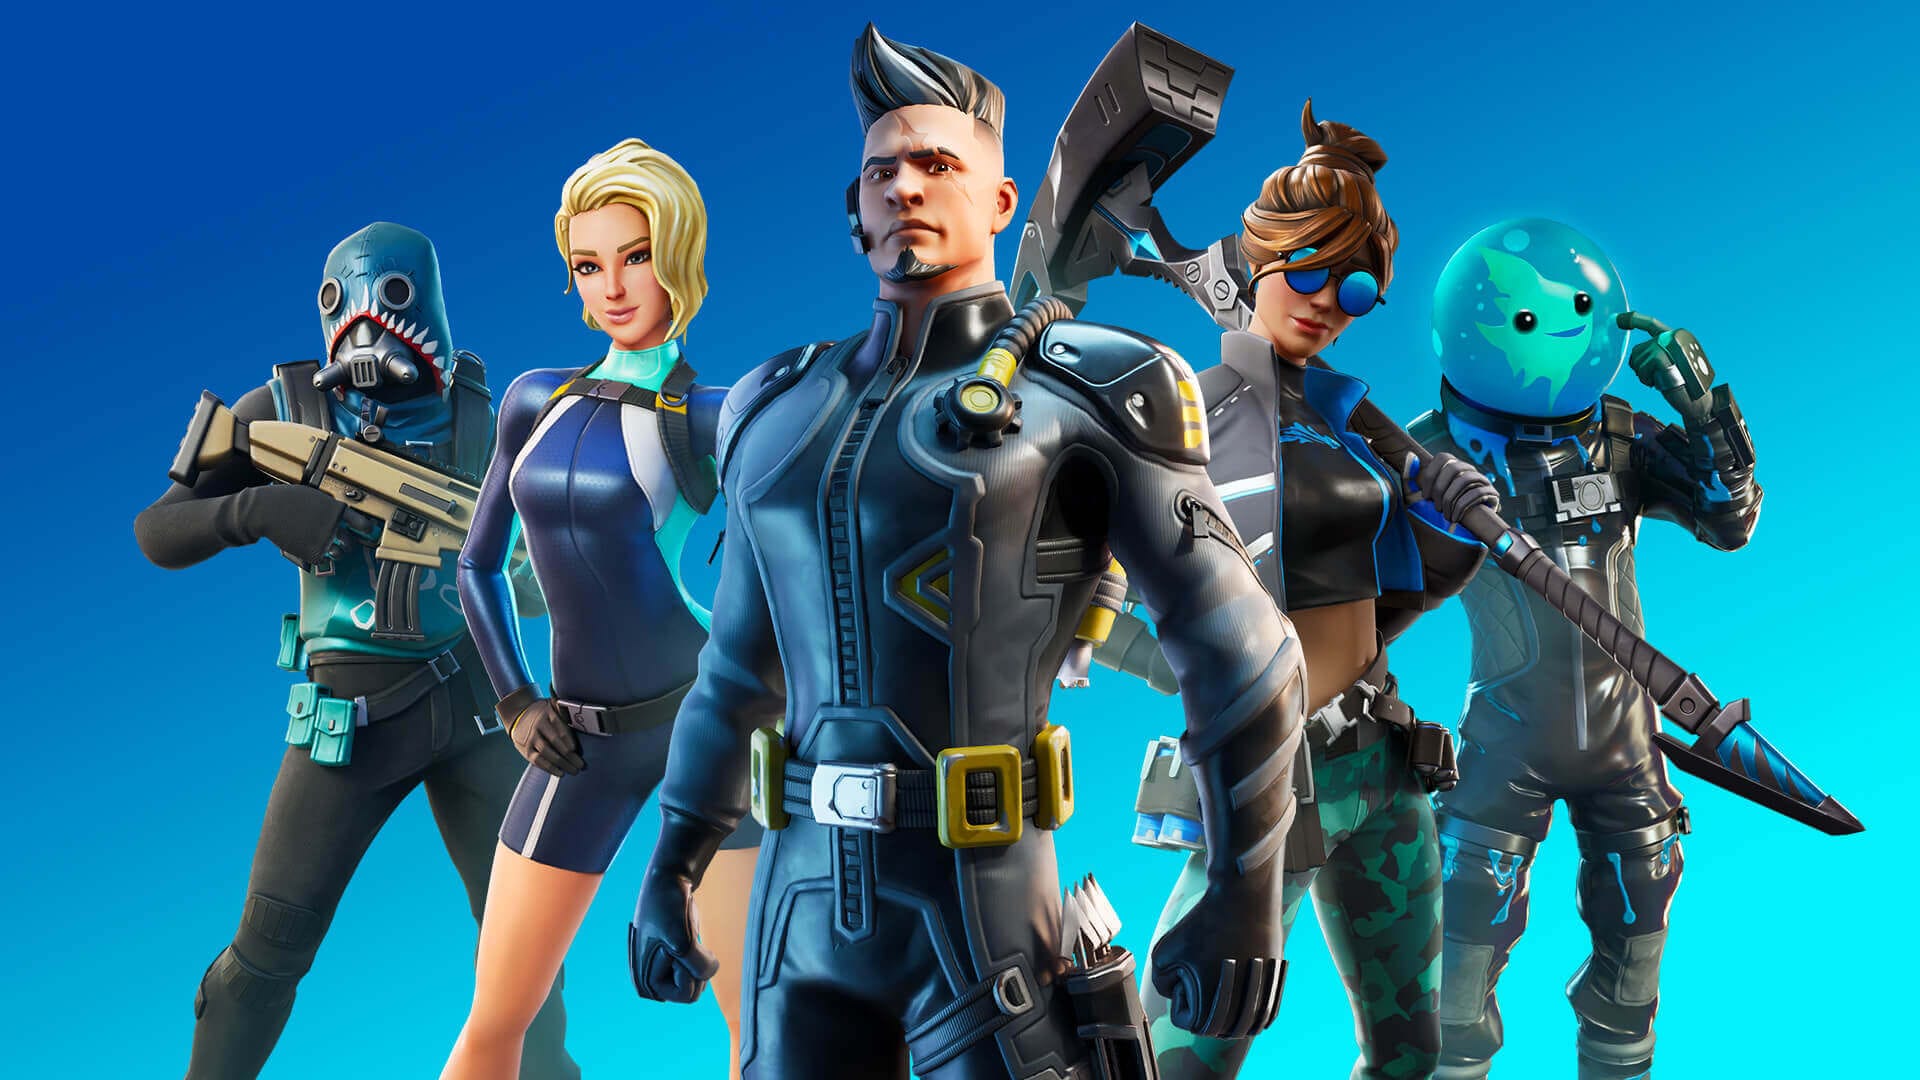 Some of the characters in Epic Games' Fortnite